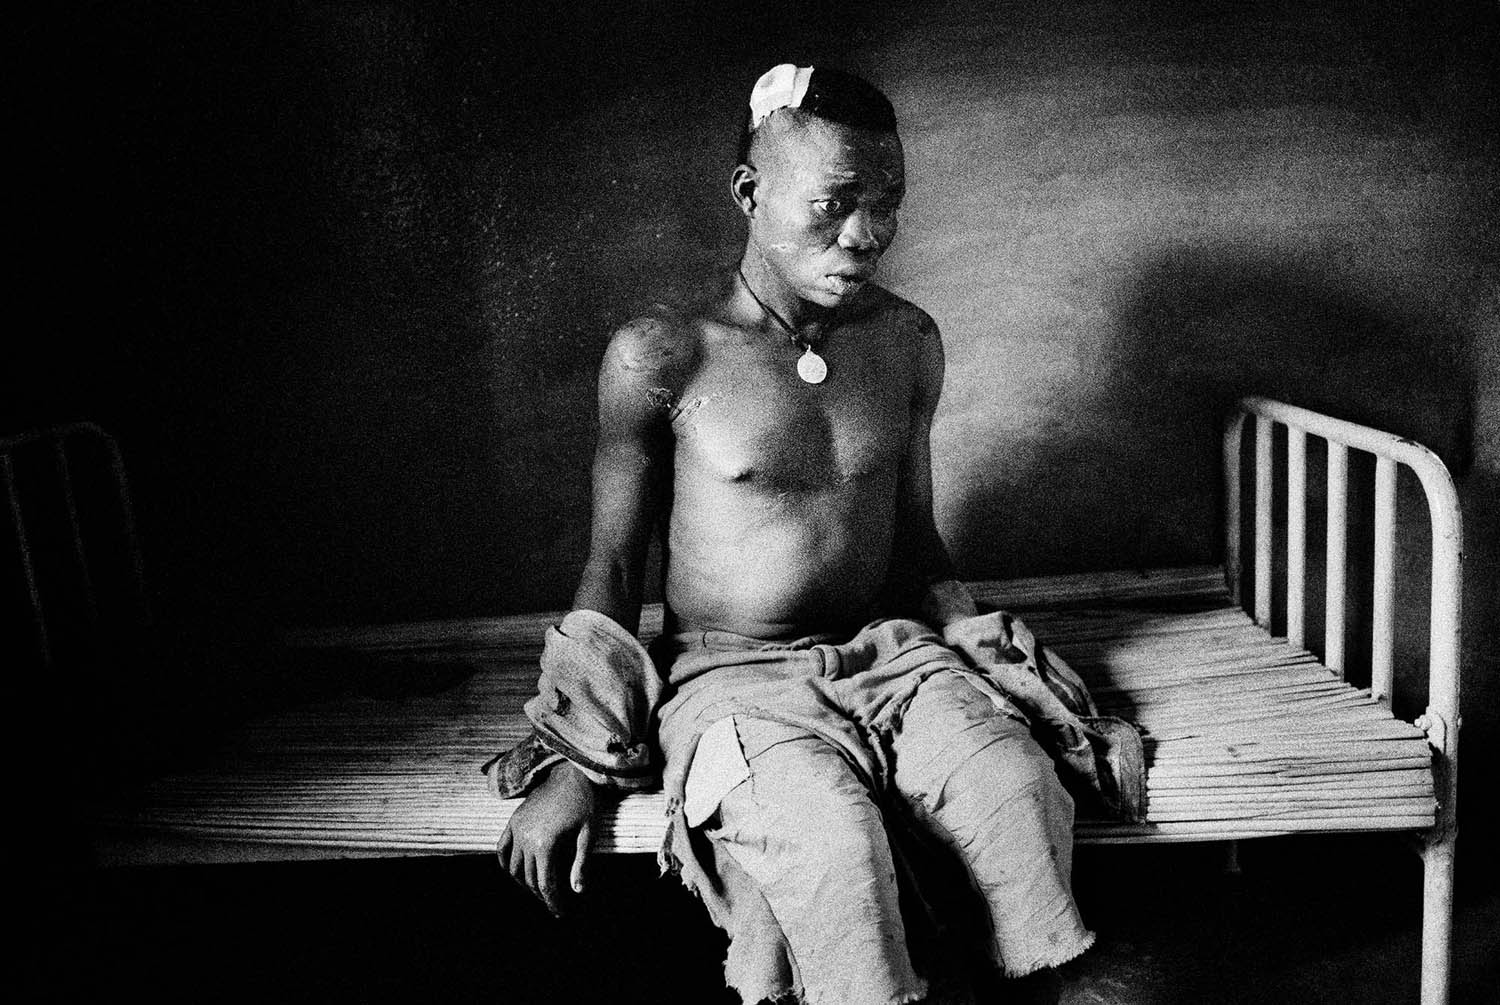 A militia soldier lies in a makeshift hospital in Dro Dro. The militia in the area have been accused of being cannibals by the local population. This militia soldier was captured and beaten by the local population. Democratic Republic of Congo. 2003.